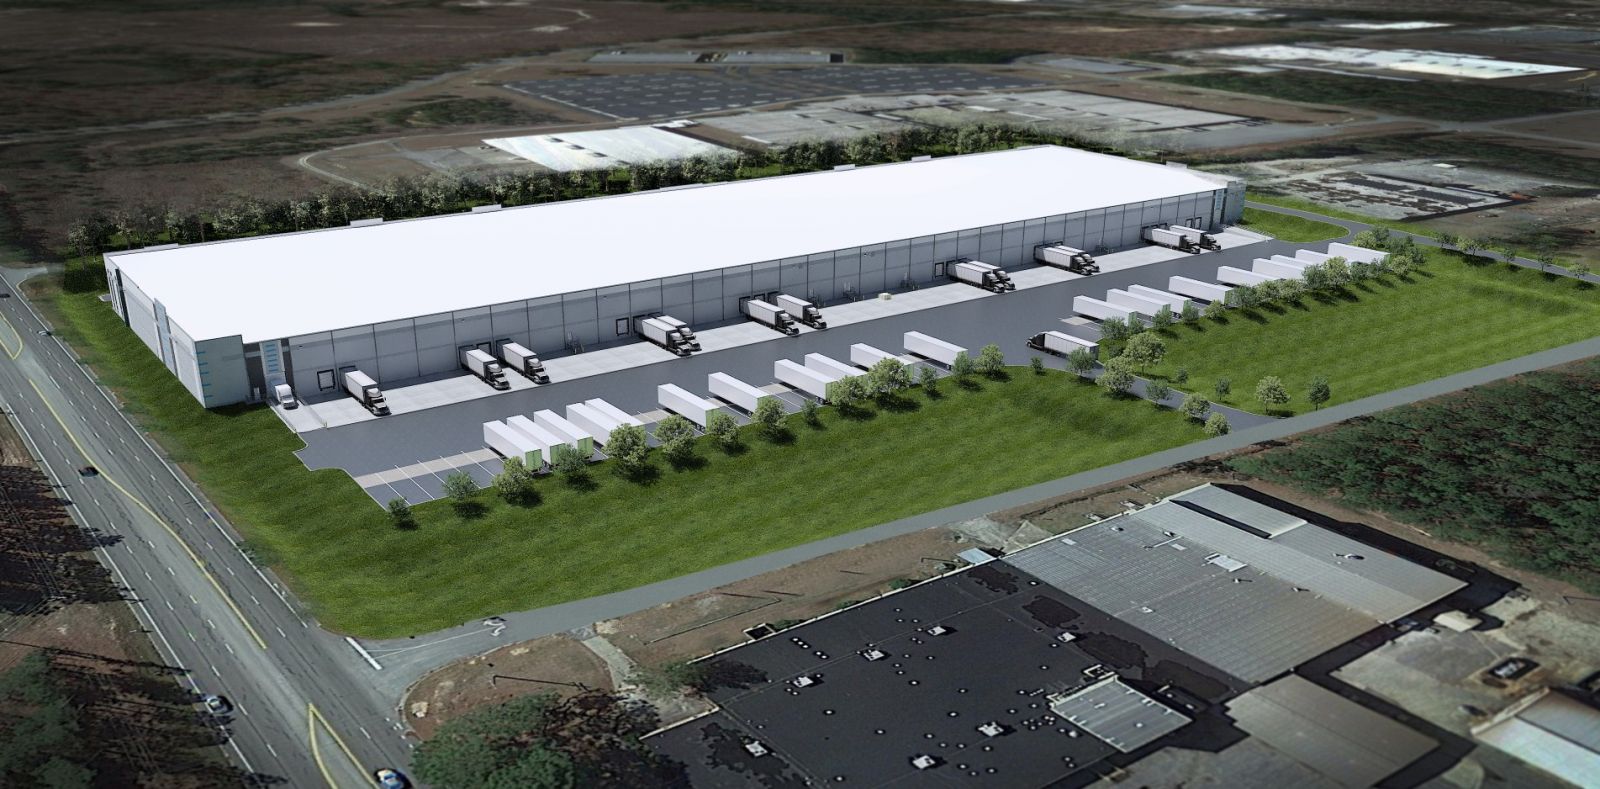 Colliers | South Carolina has been selected to provide brokerage and marketing services for a 247,000-square-foot distribution center at Columbia Metropolitan Airport. (Photo/Provided)